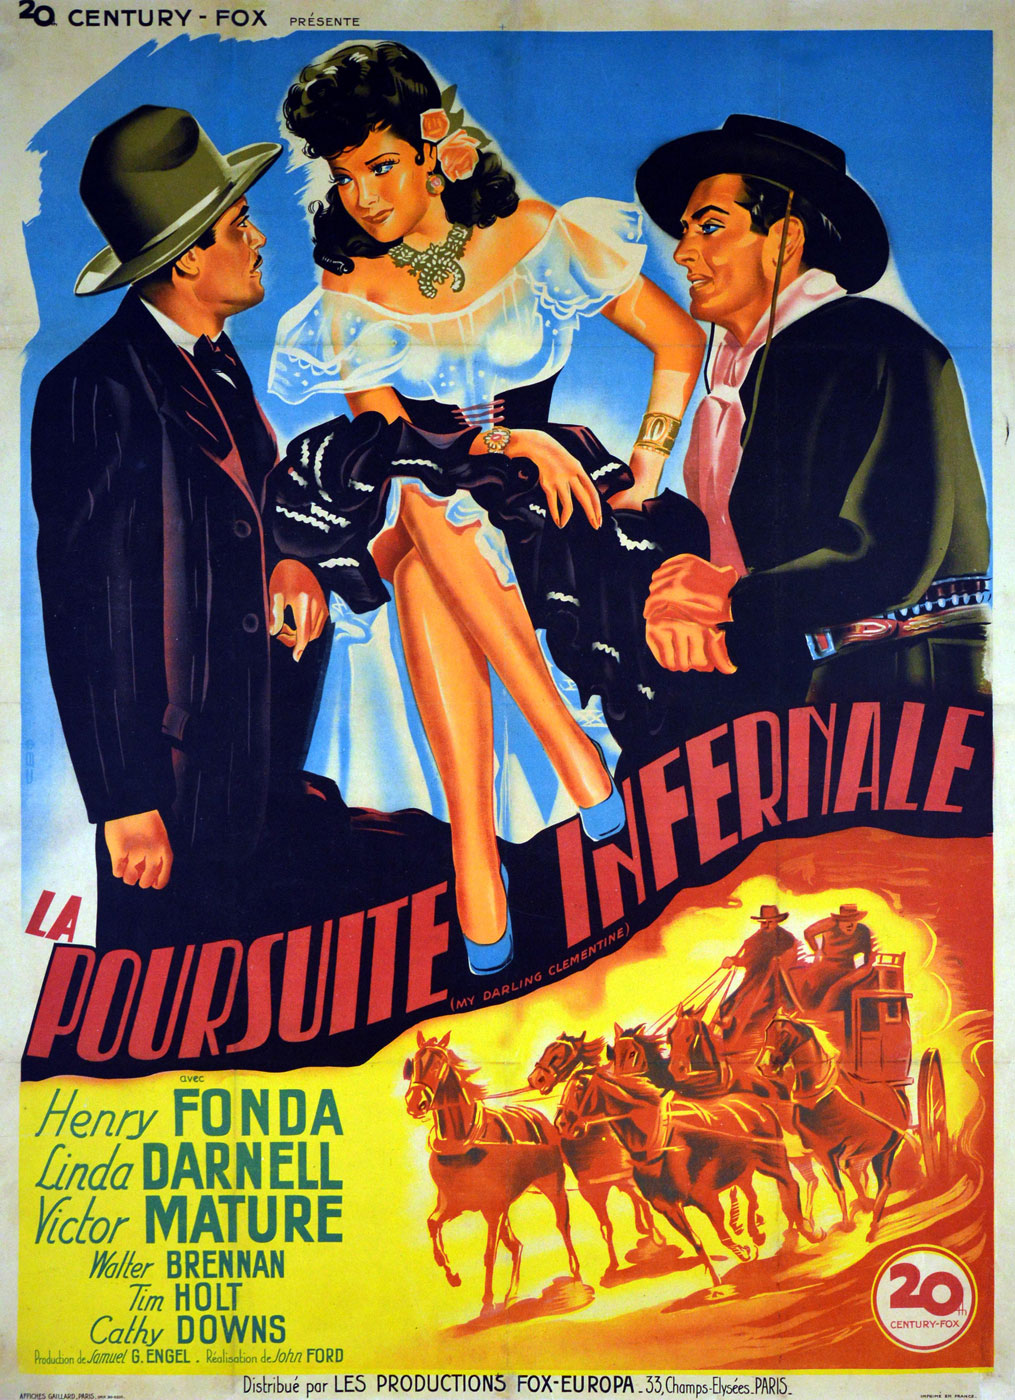 My Darling Clementine by John Ford (47 x 63 in)